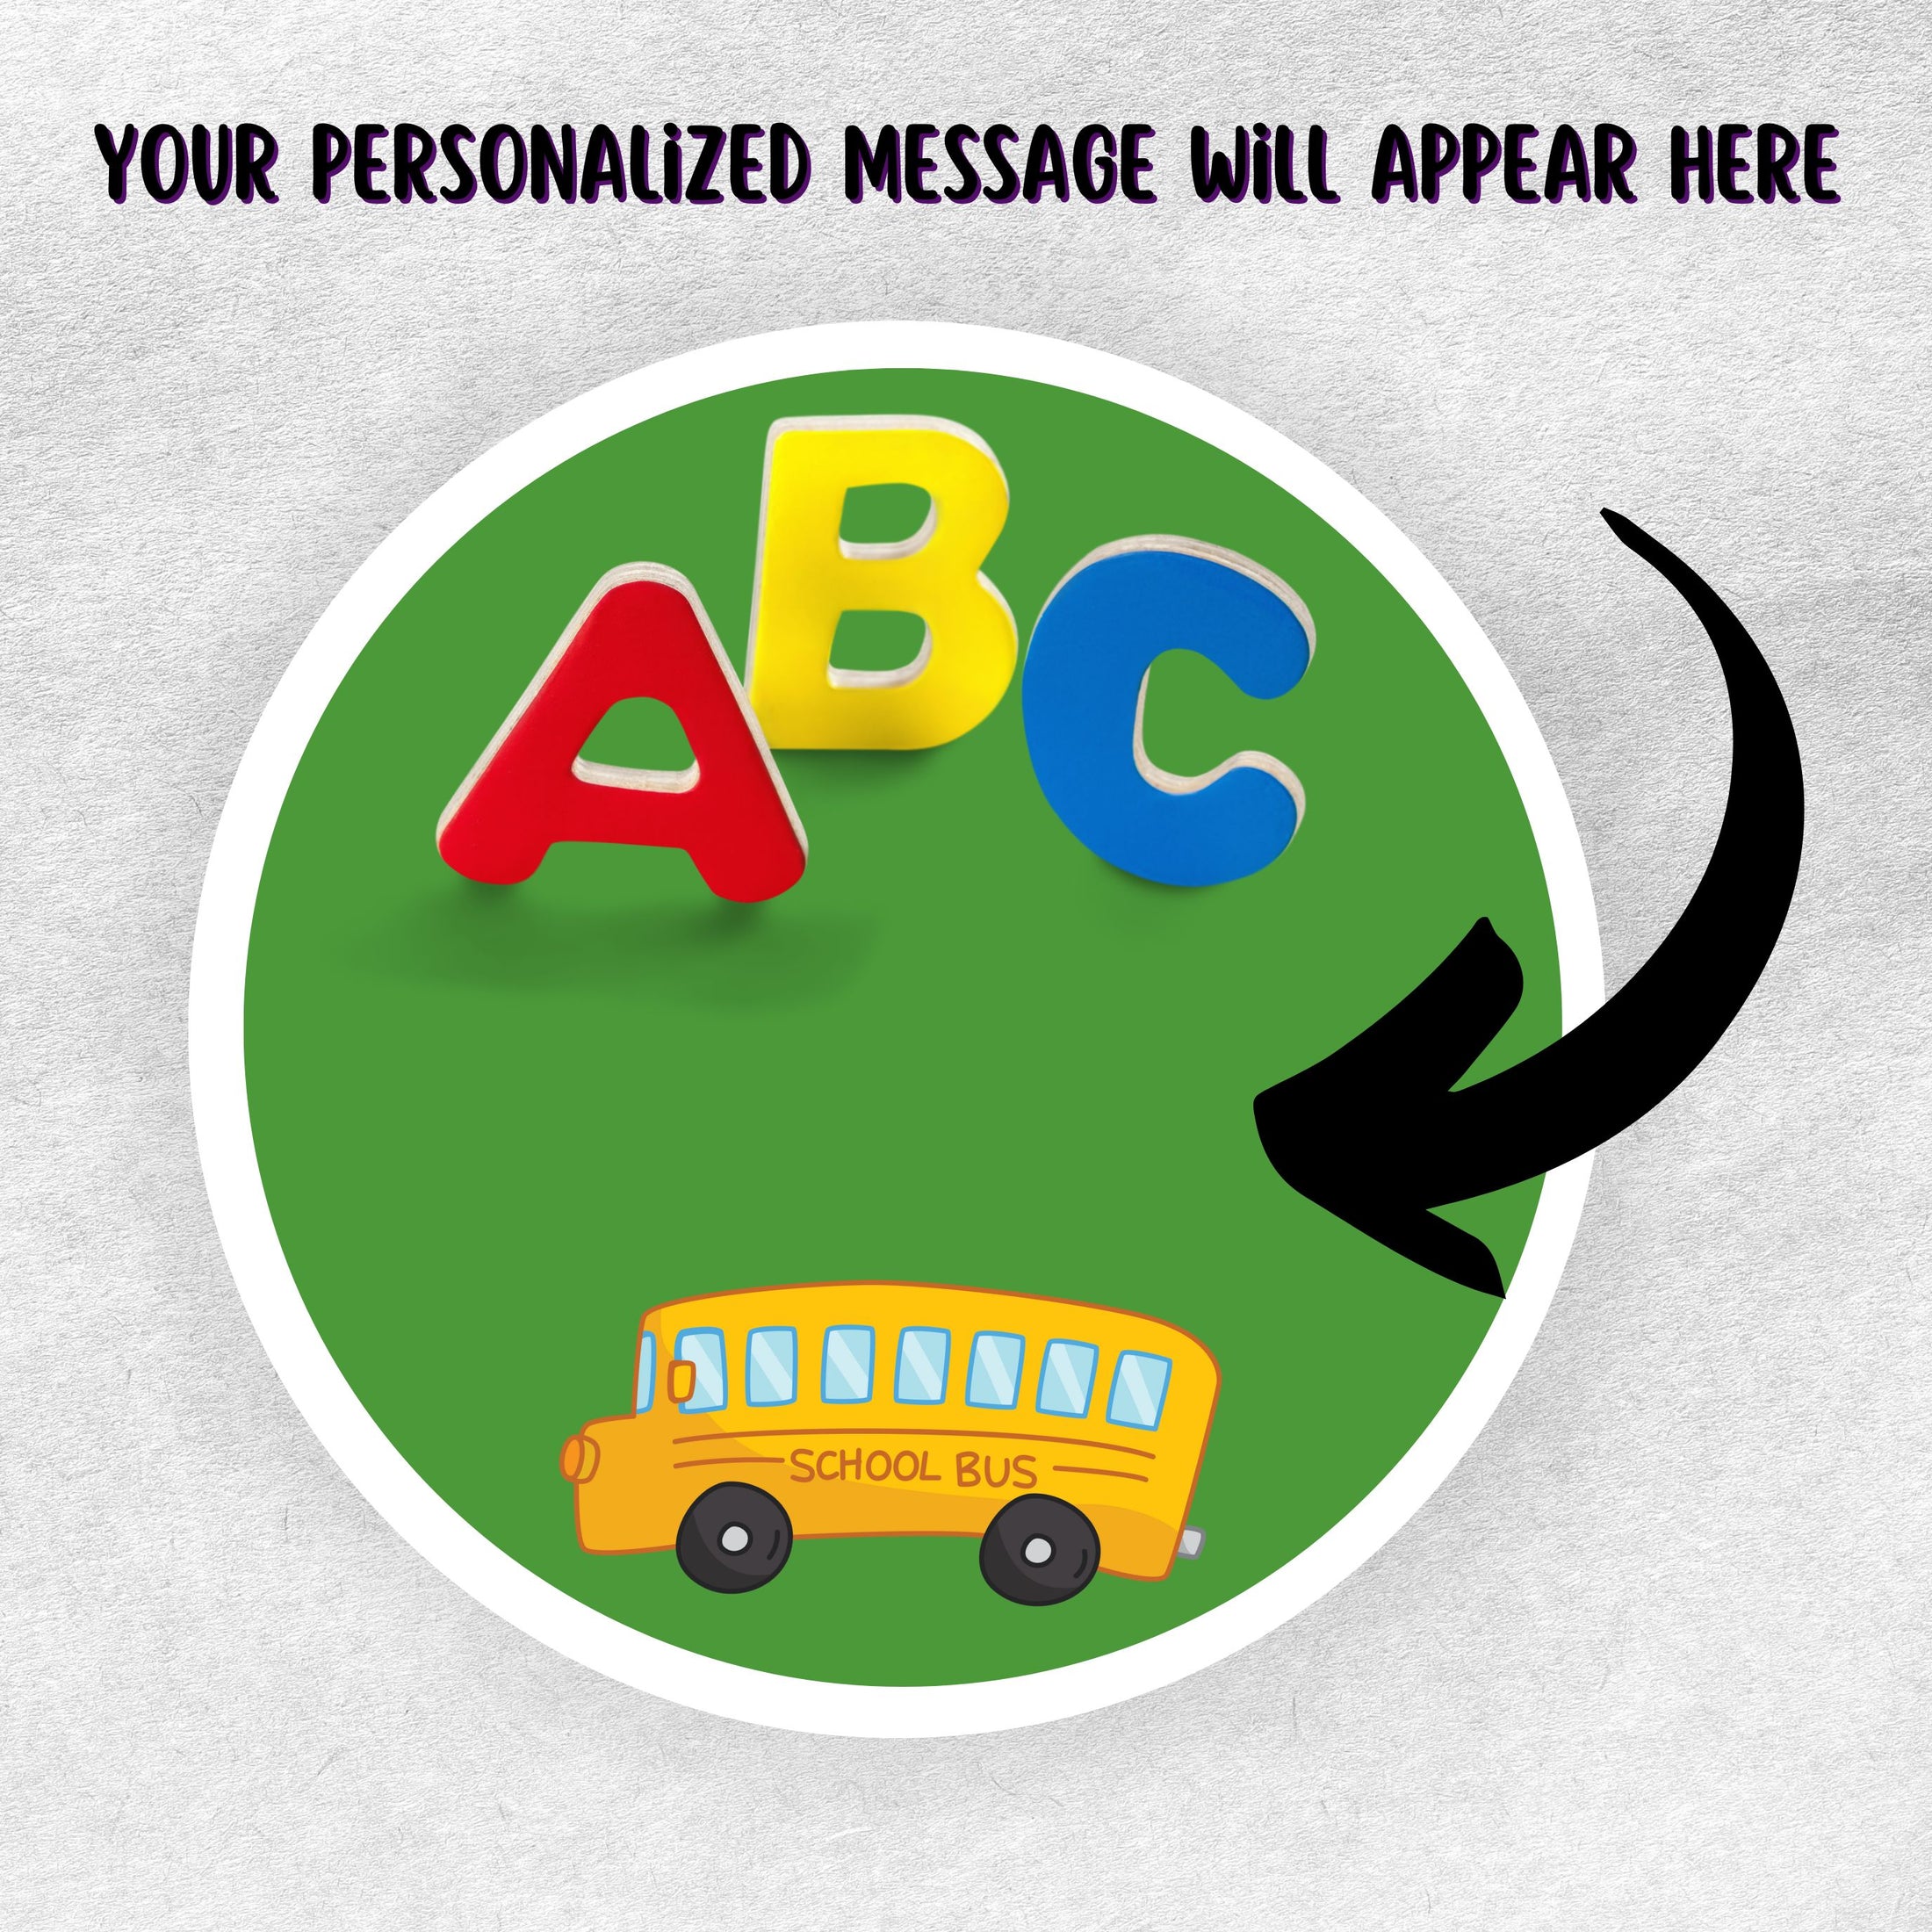 This image shows the personalized school sticker with an arrow showing where your personalized message will go.